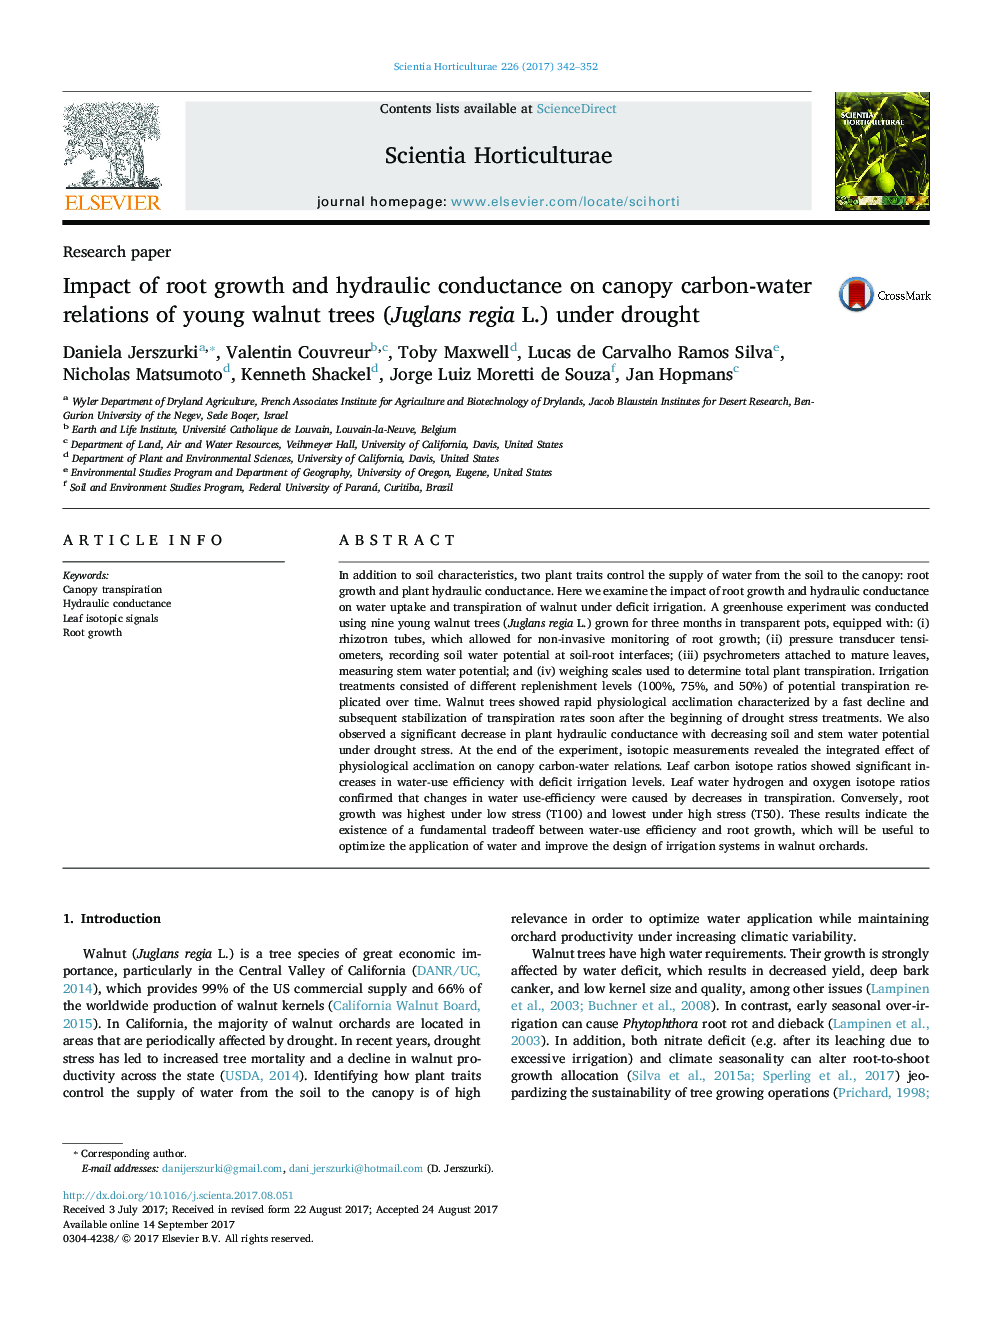 Research paperImpact of root growth and hydraulic conductance on canopy carbon-water relations of young walnut trees (Juglans regia L.) under drought